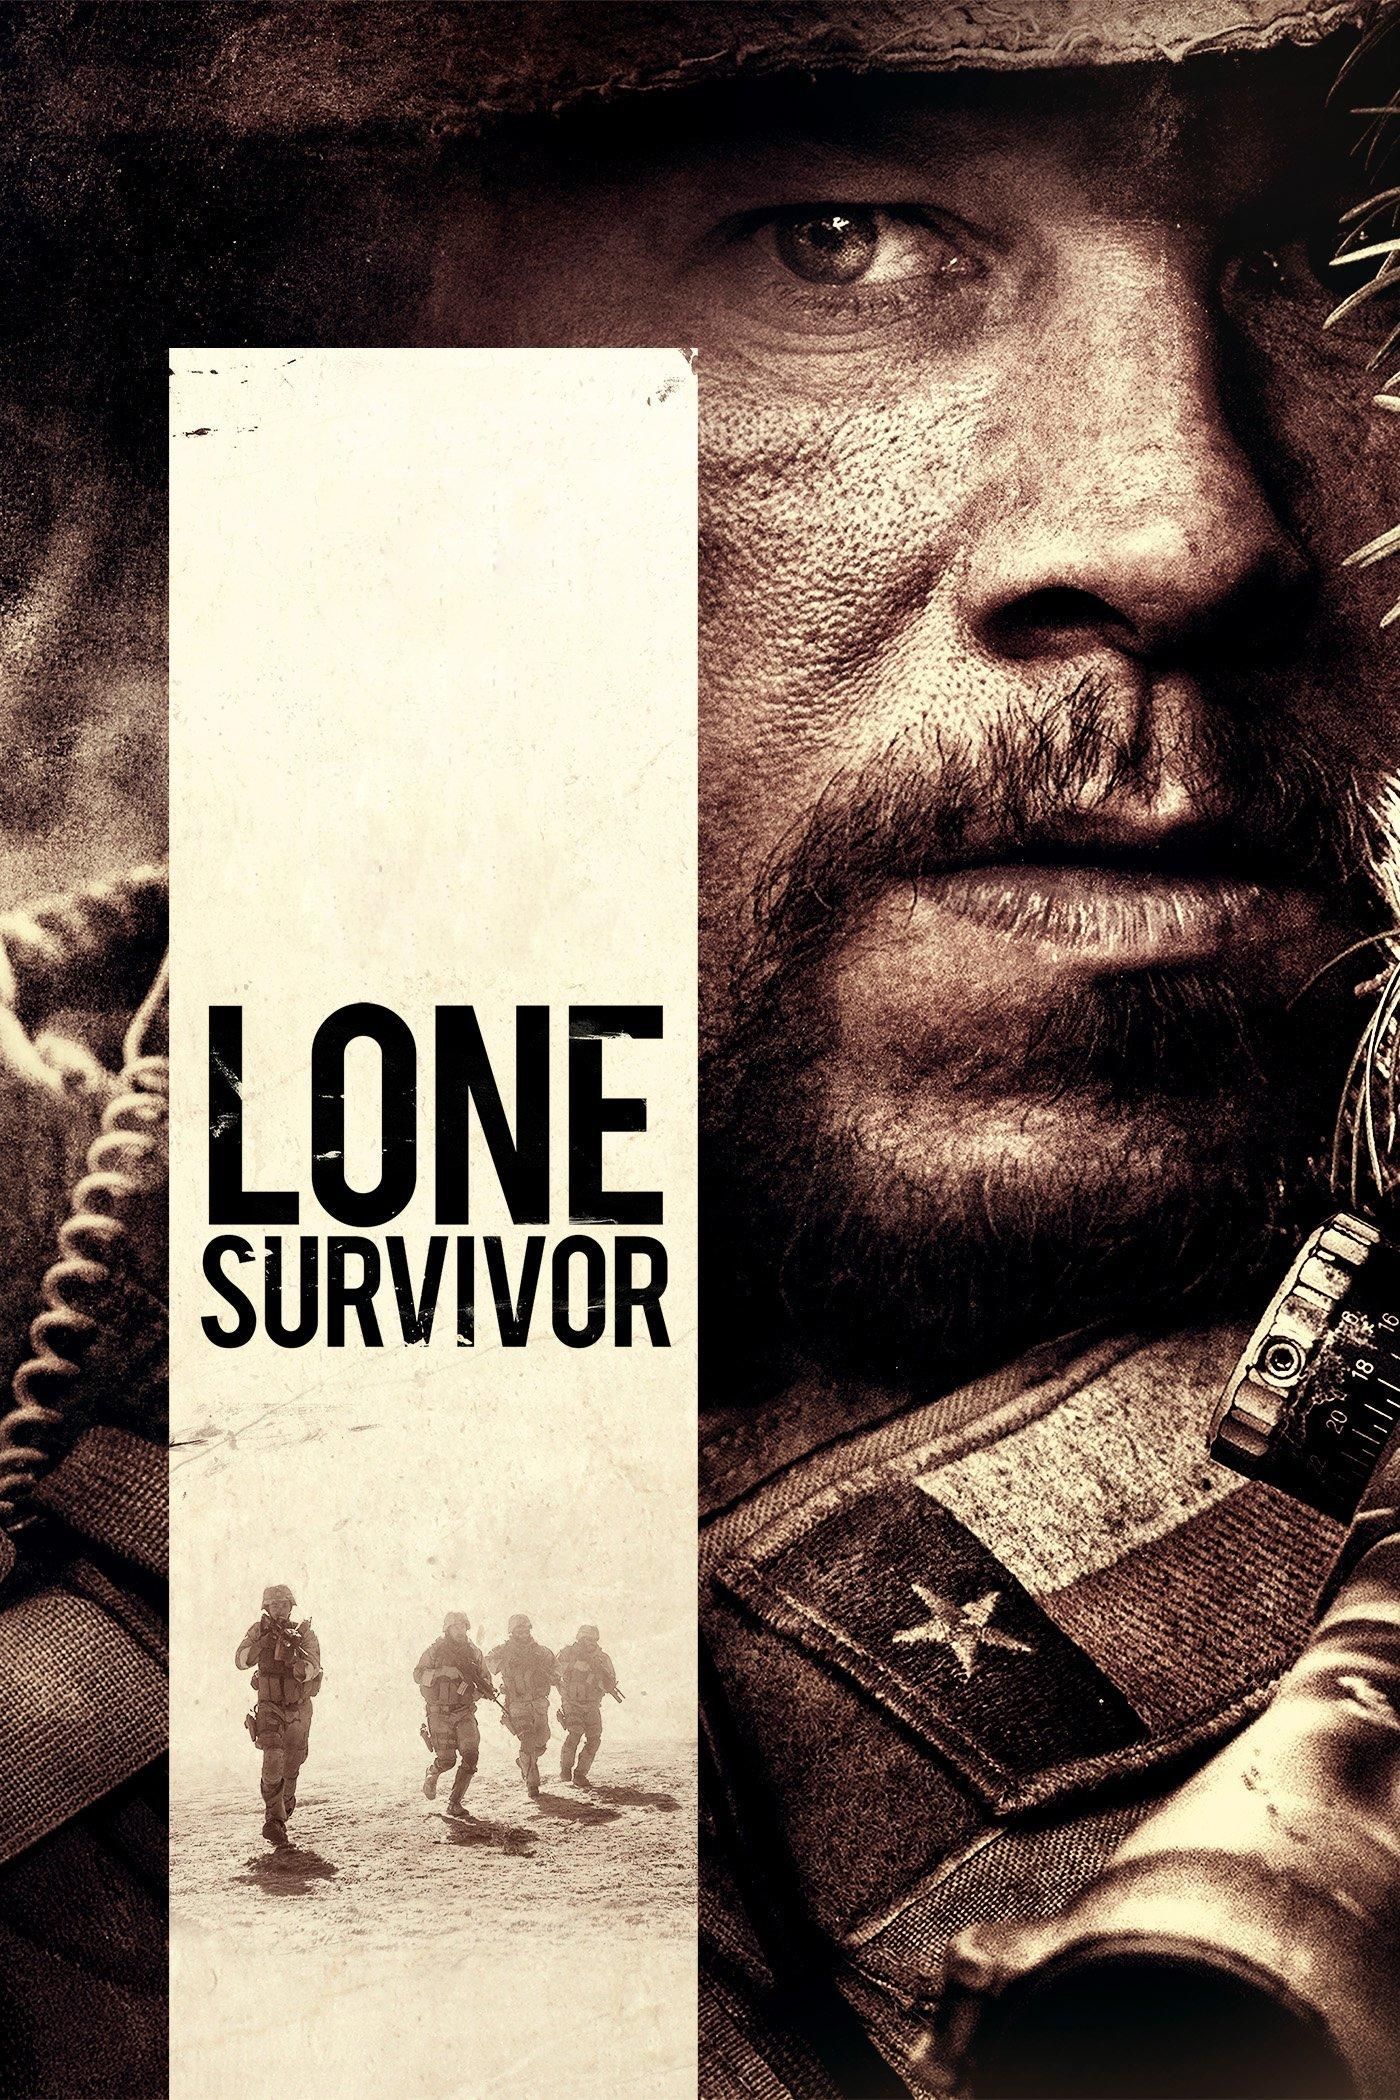 THERE WAS A HOLE  Lone Survivor #1 